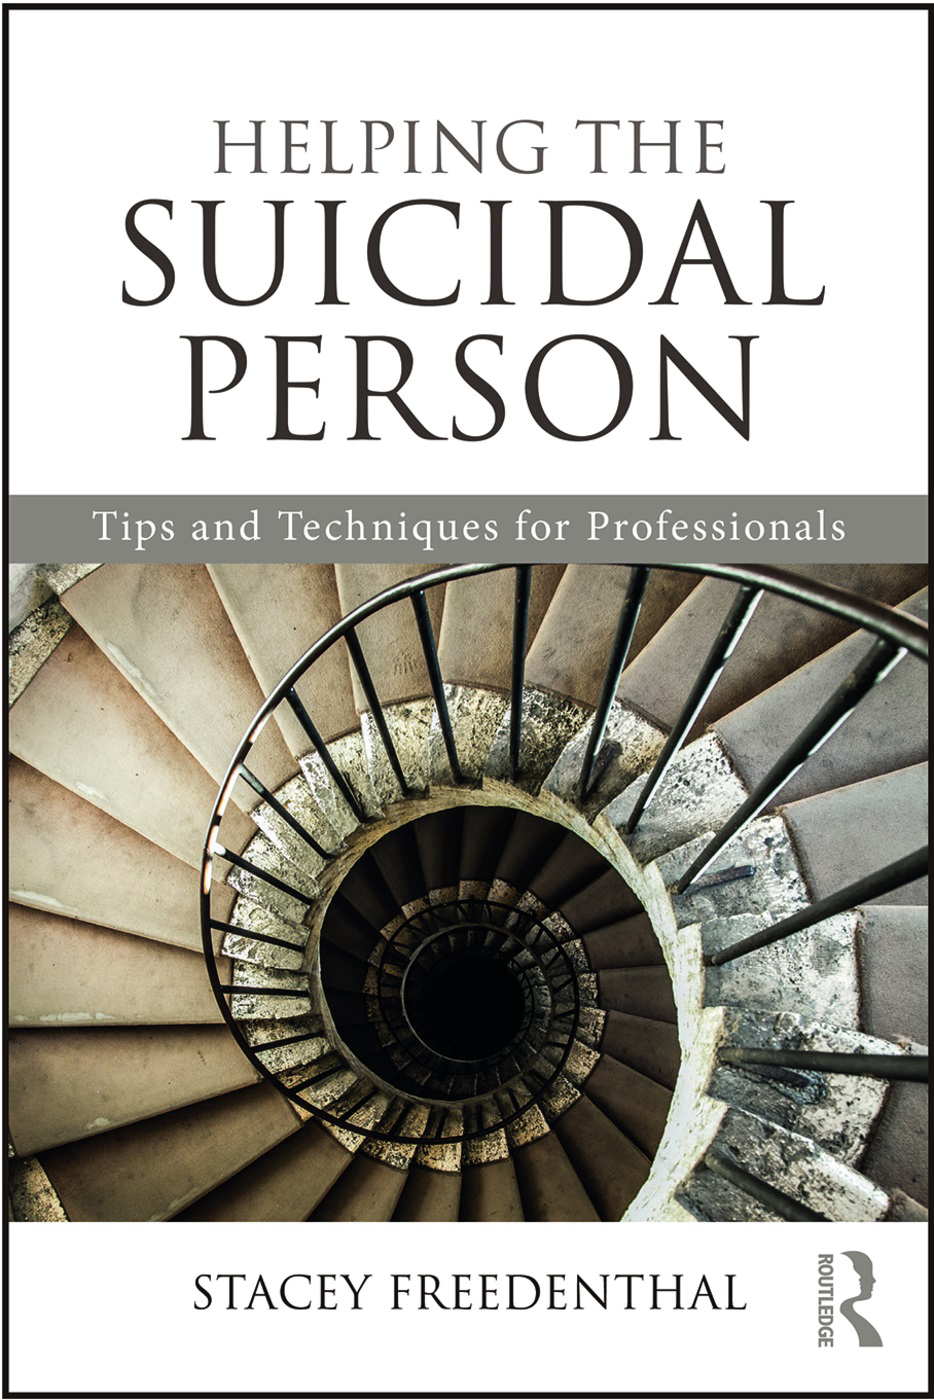 Helping the Suicidal Person: Tips and Techniques for Professionals, by Stacey Freedenthal